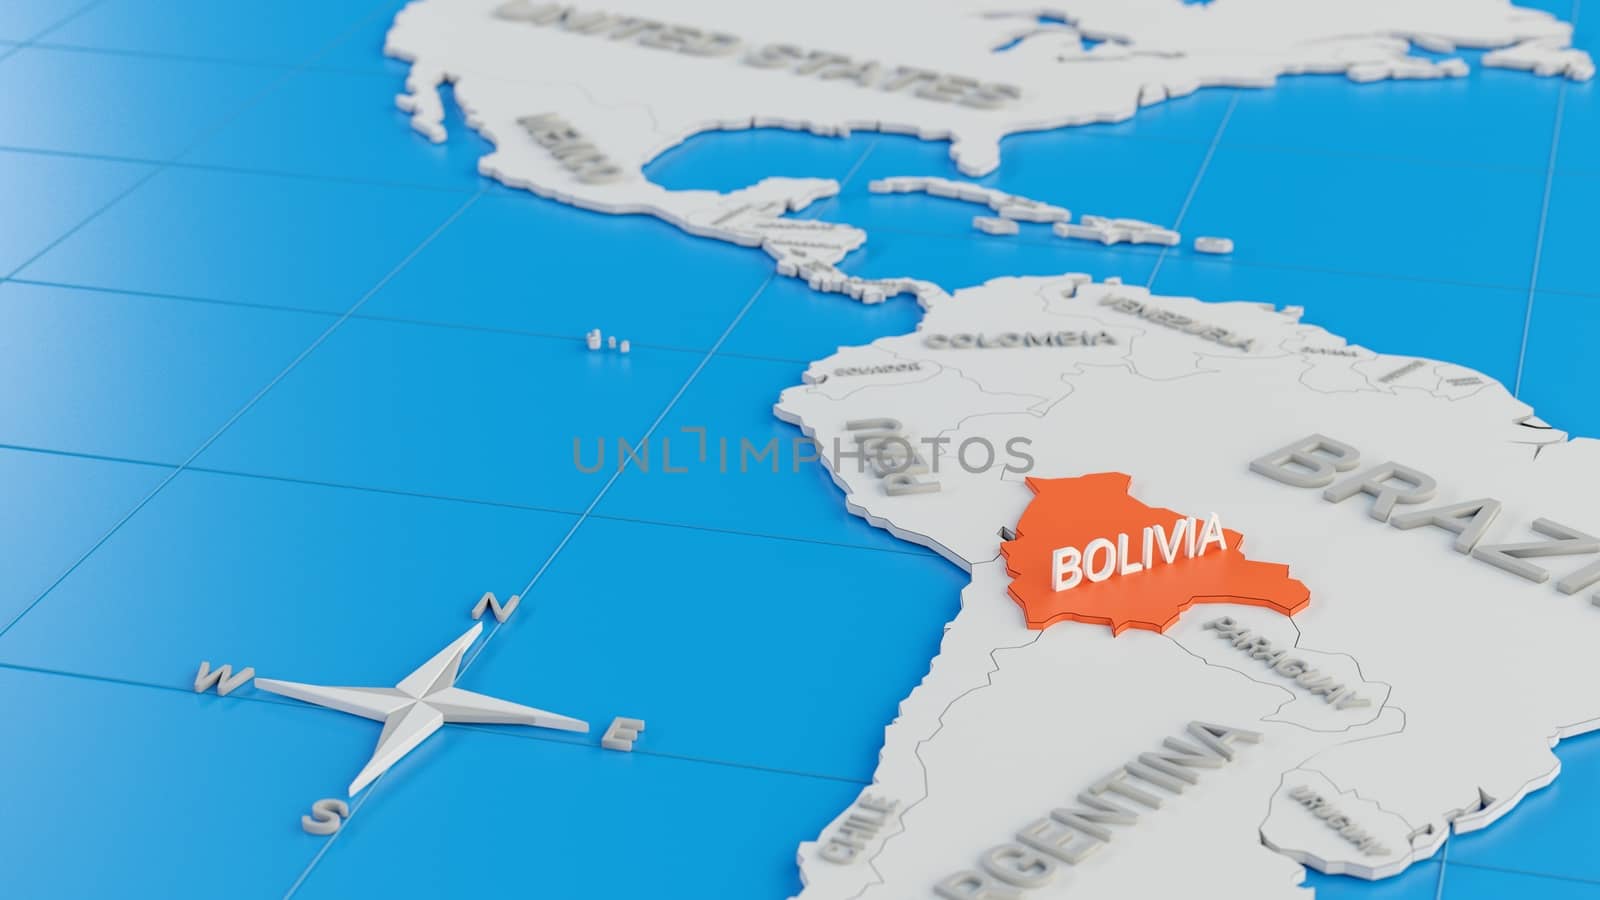 Simplified 3D map of South America, with Bolivia highlighted. Digital 3D render.